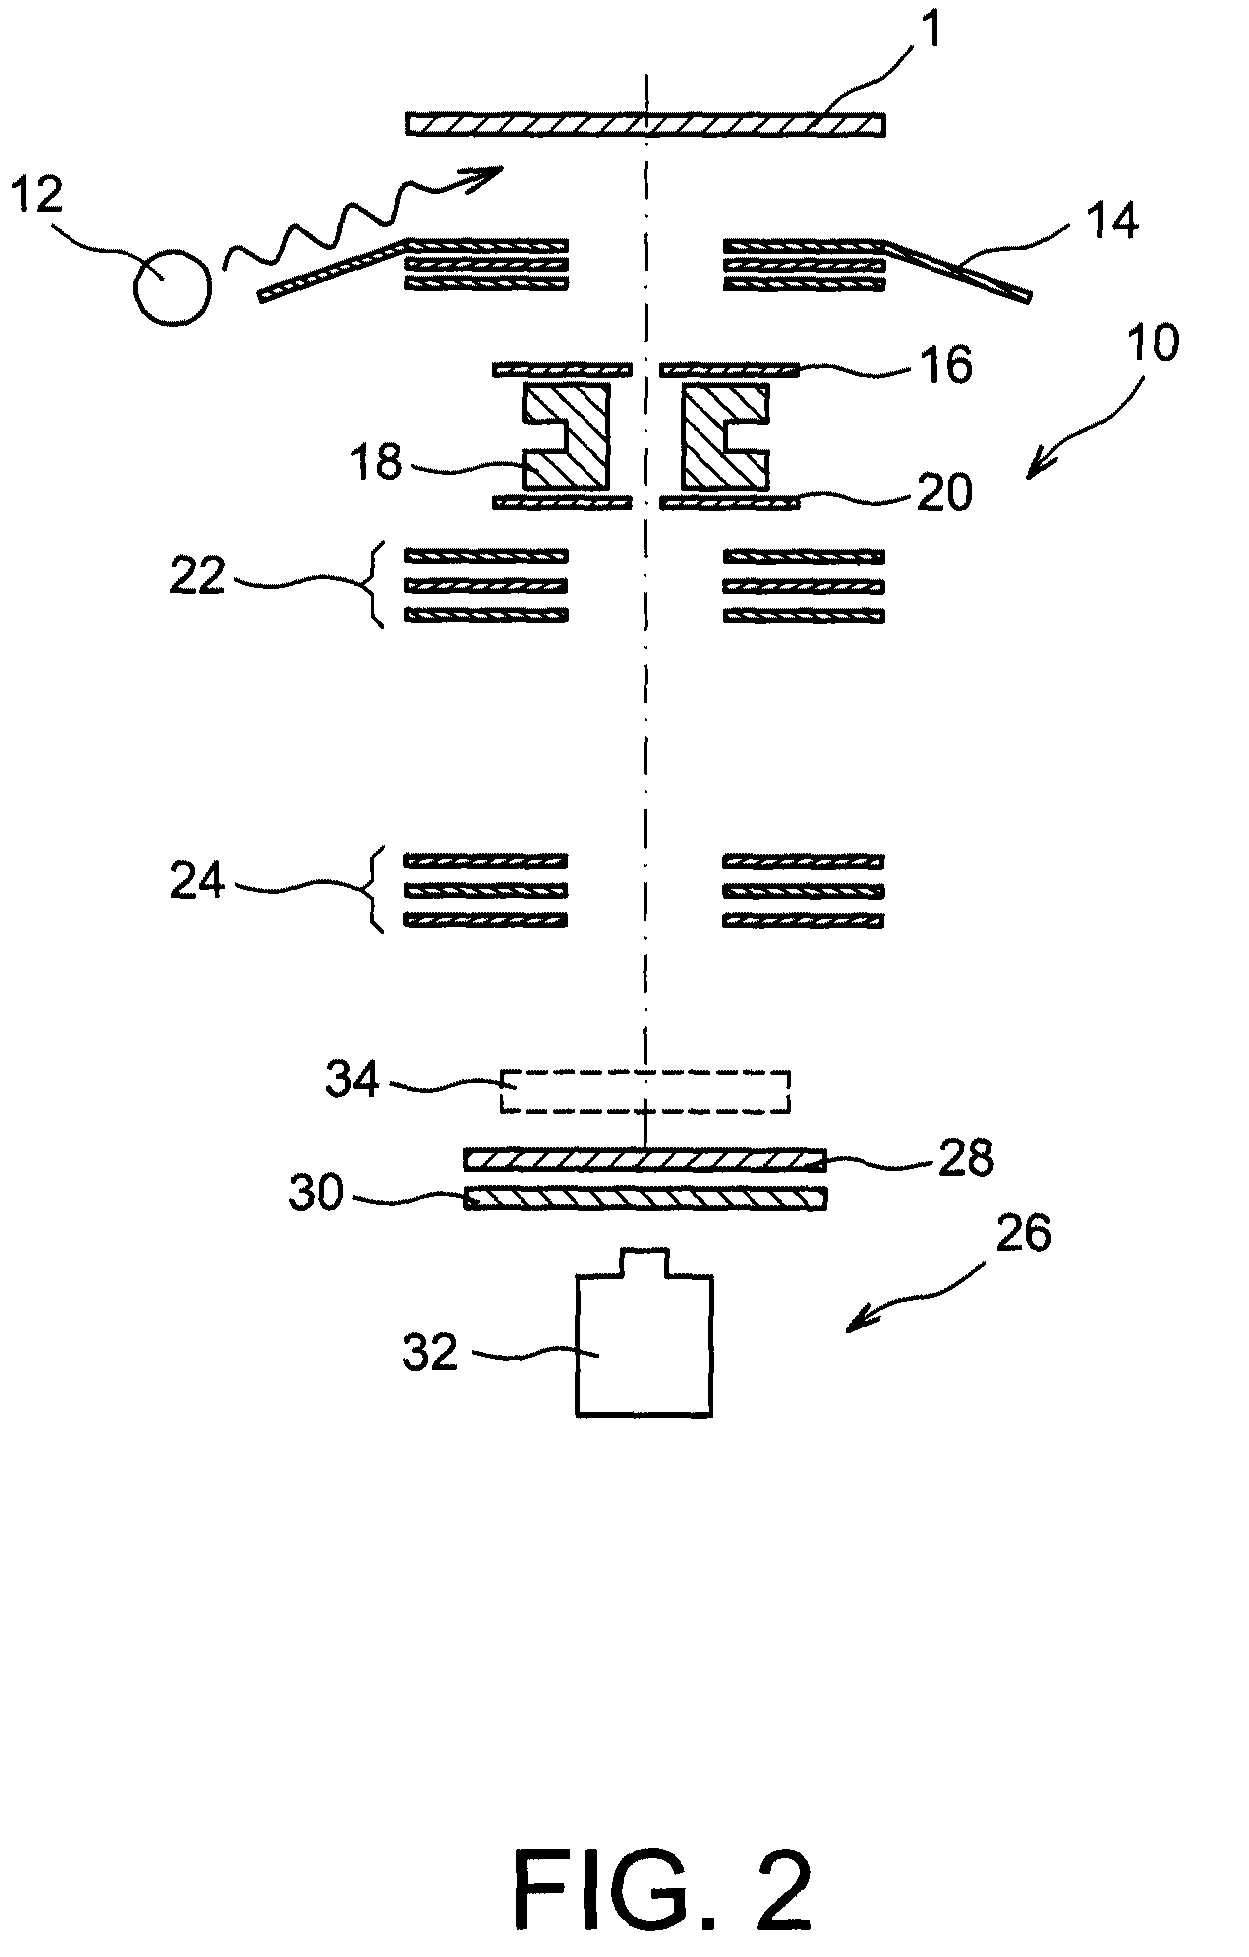 Method for correcting astigmatism in electron emission spectromicroscopy imaging